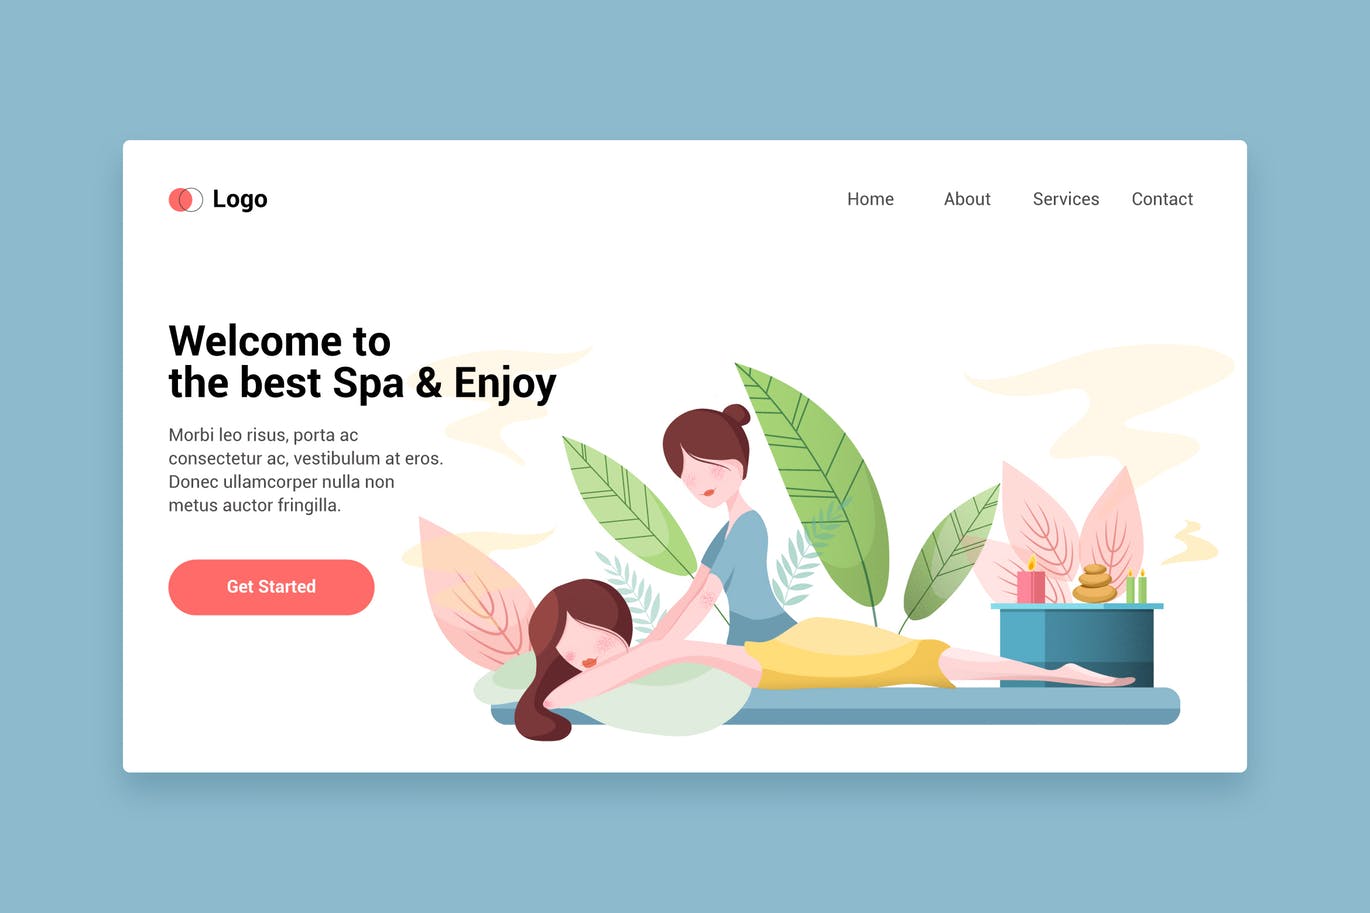 SPA美容主题矢量插画网站着陆页设计模板v11 Beauty spa flat web template for Landing page插图